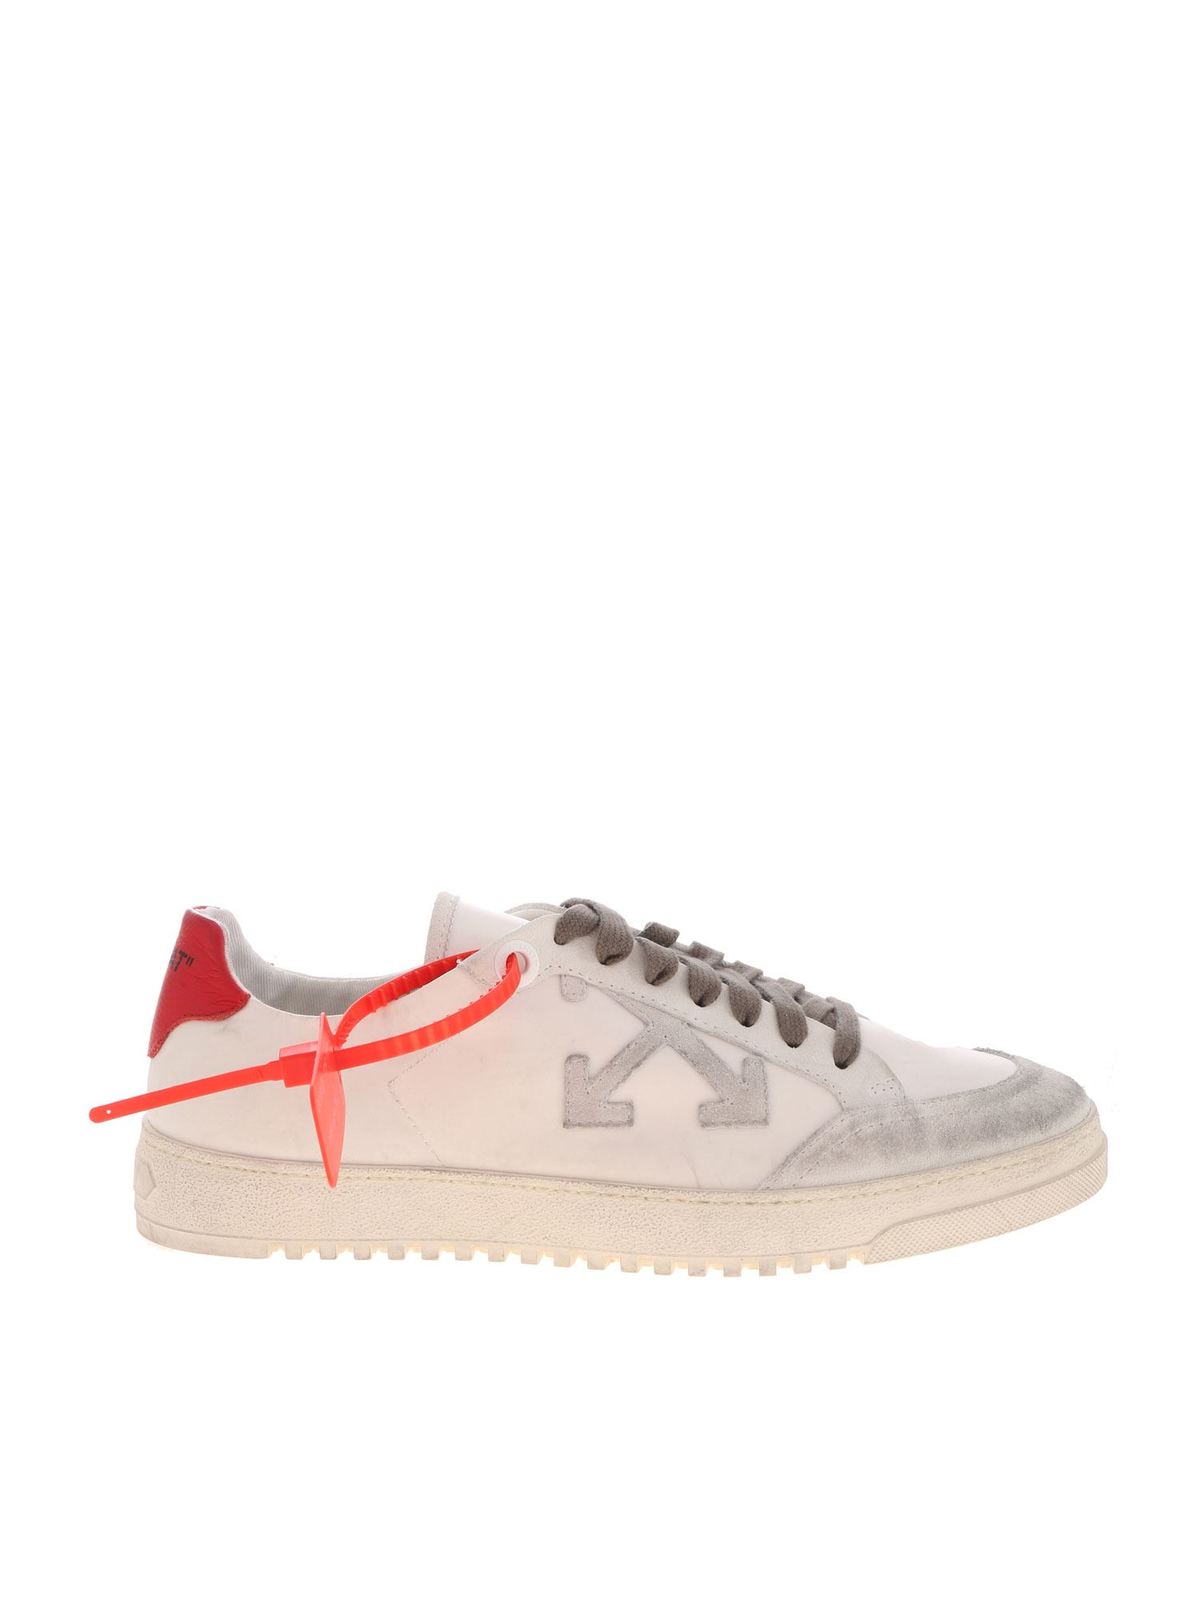 OFF-WHITE 20 SNEAKERS IN WHITE AND RED